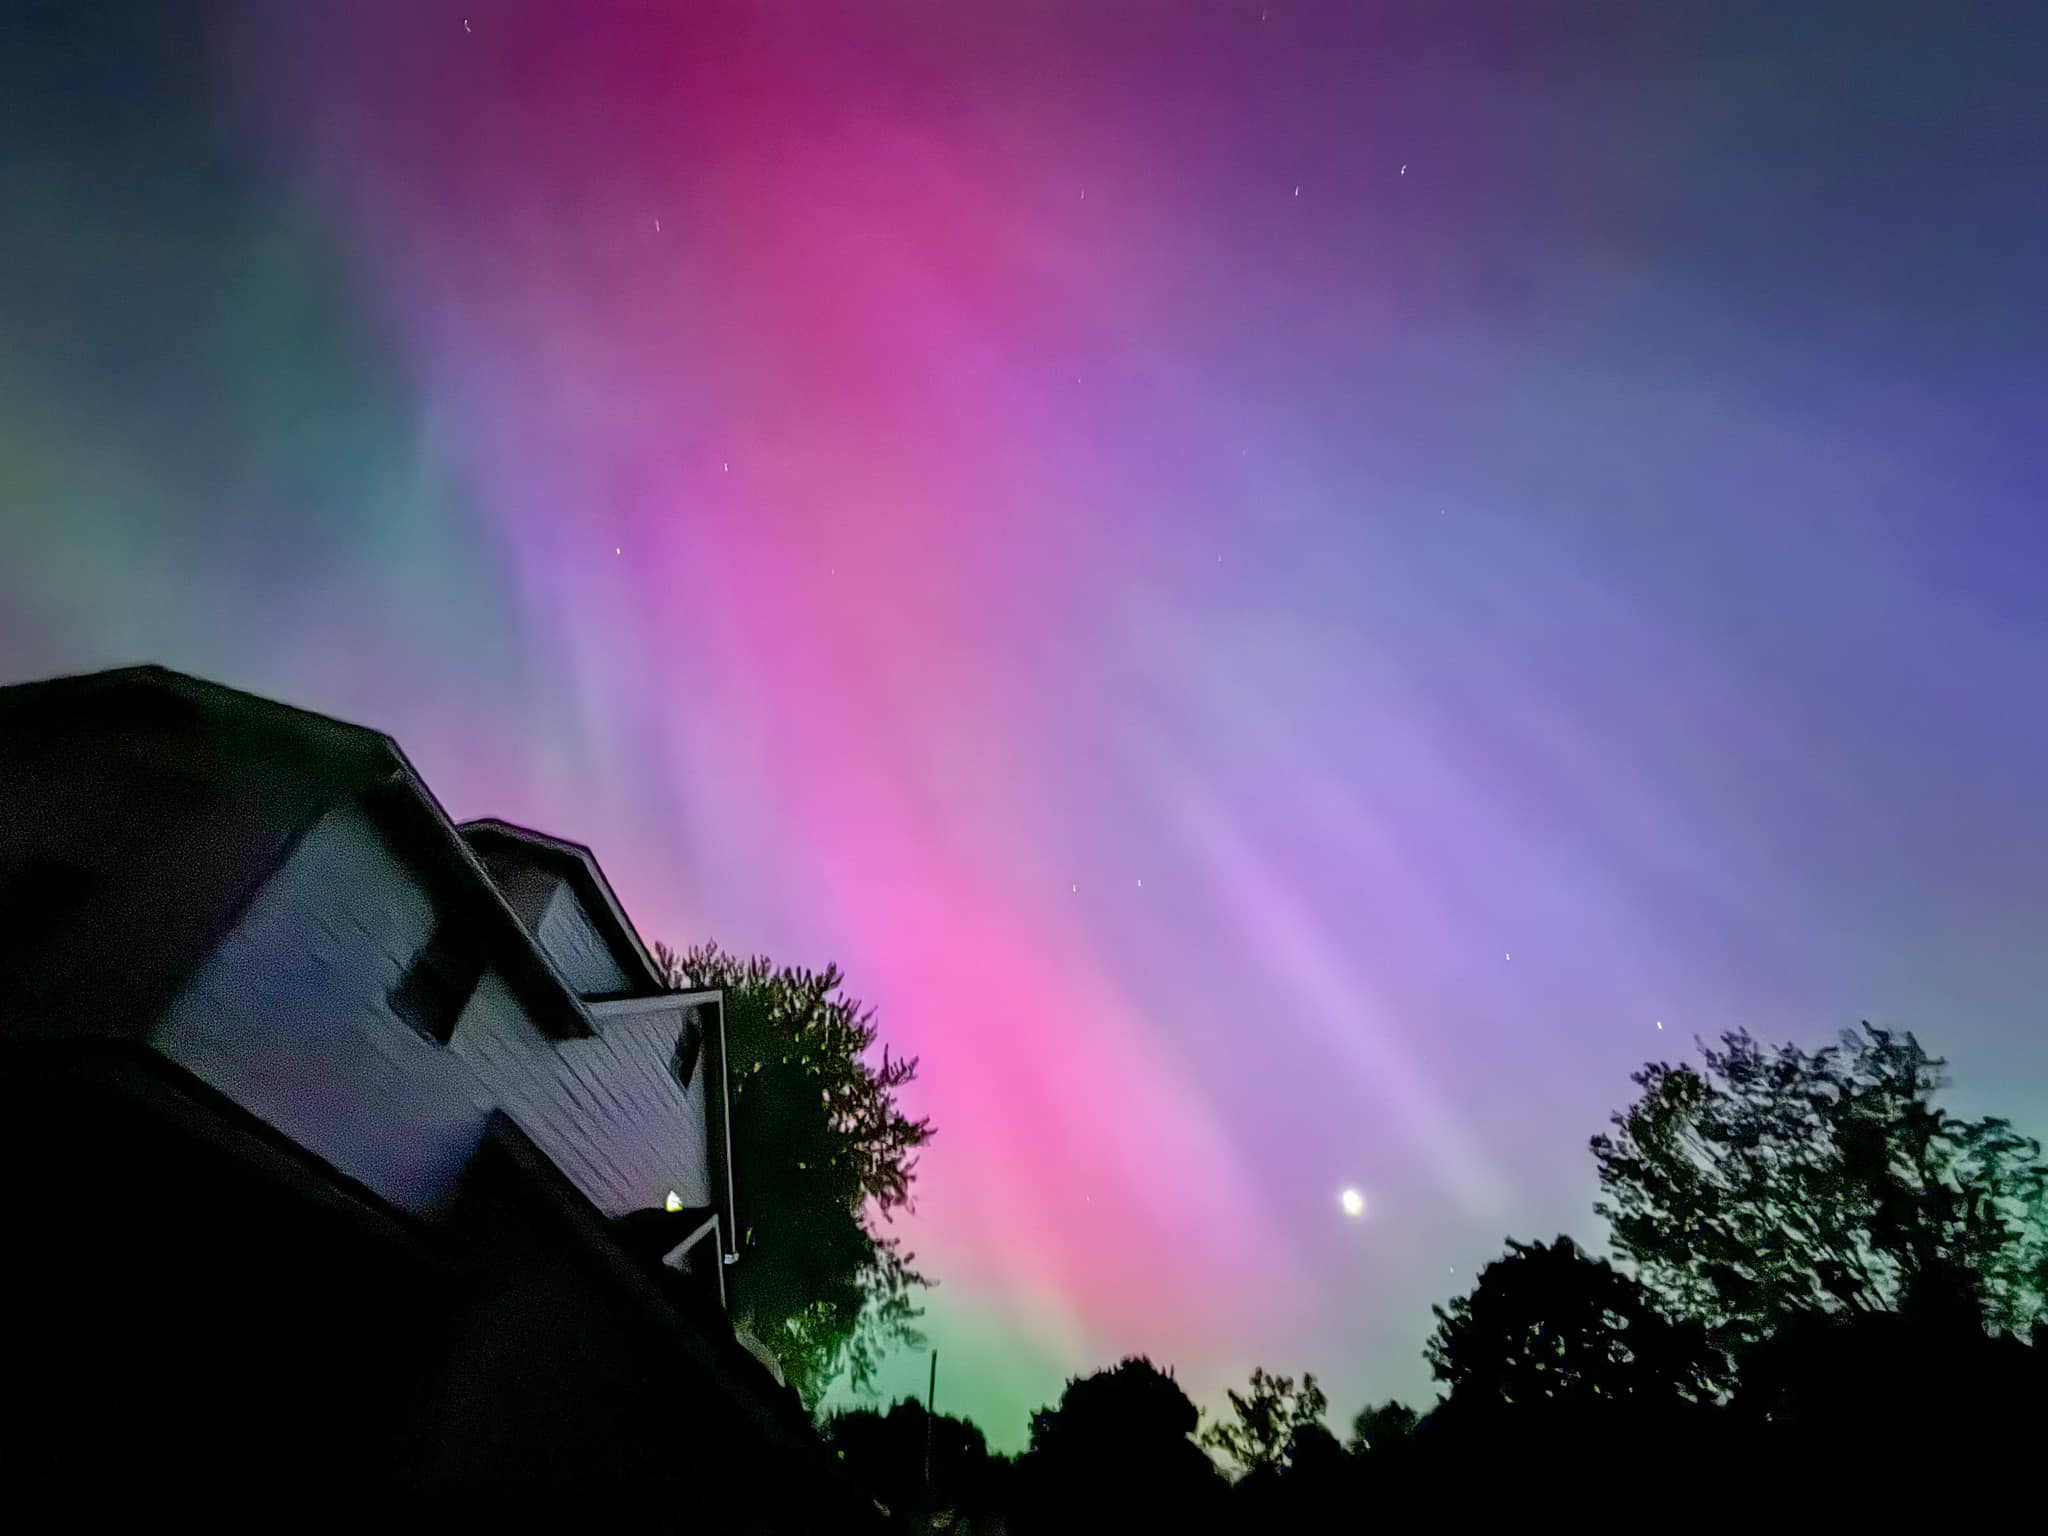 Incredible view of the Northern lights tonight! Who else is enjoying them?